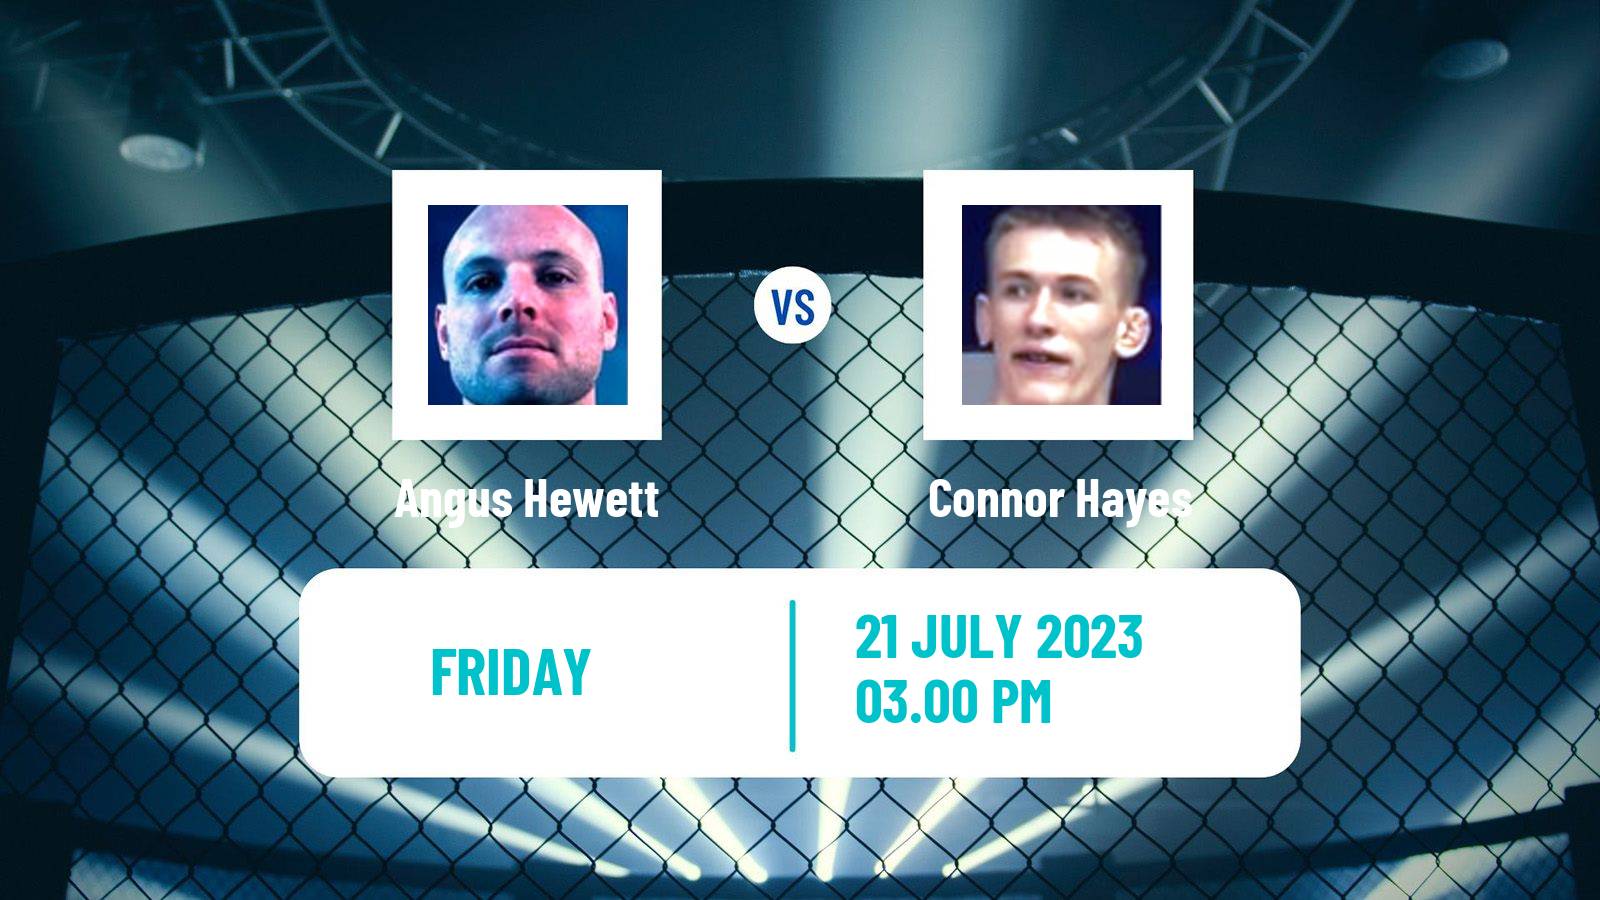 MMA Middleweight Cage Warriors Men Angus Hewett - Connor Hayes